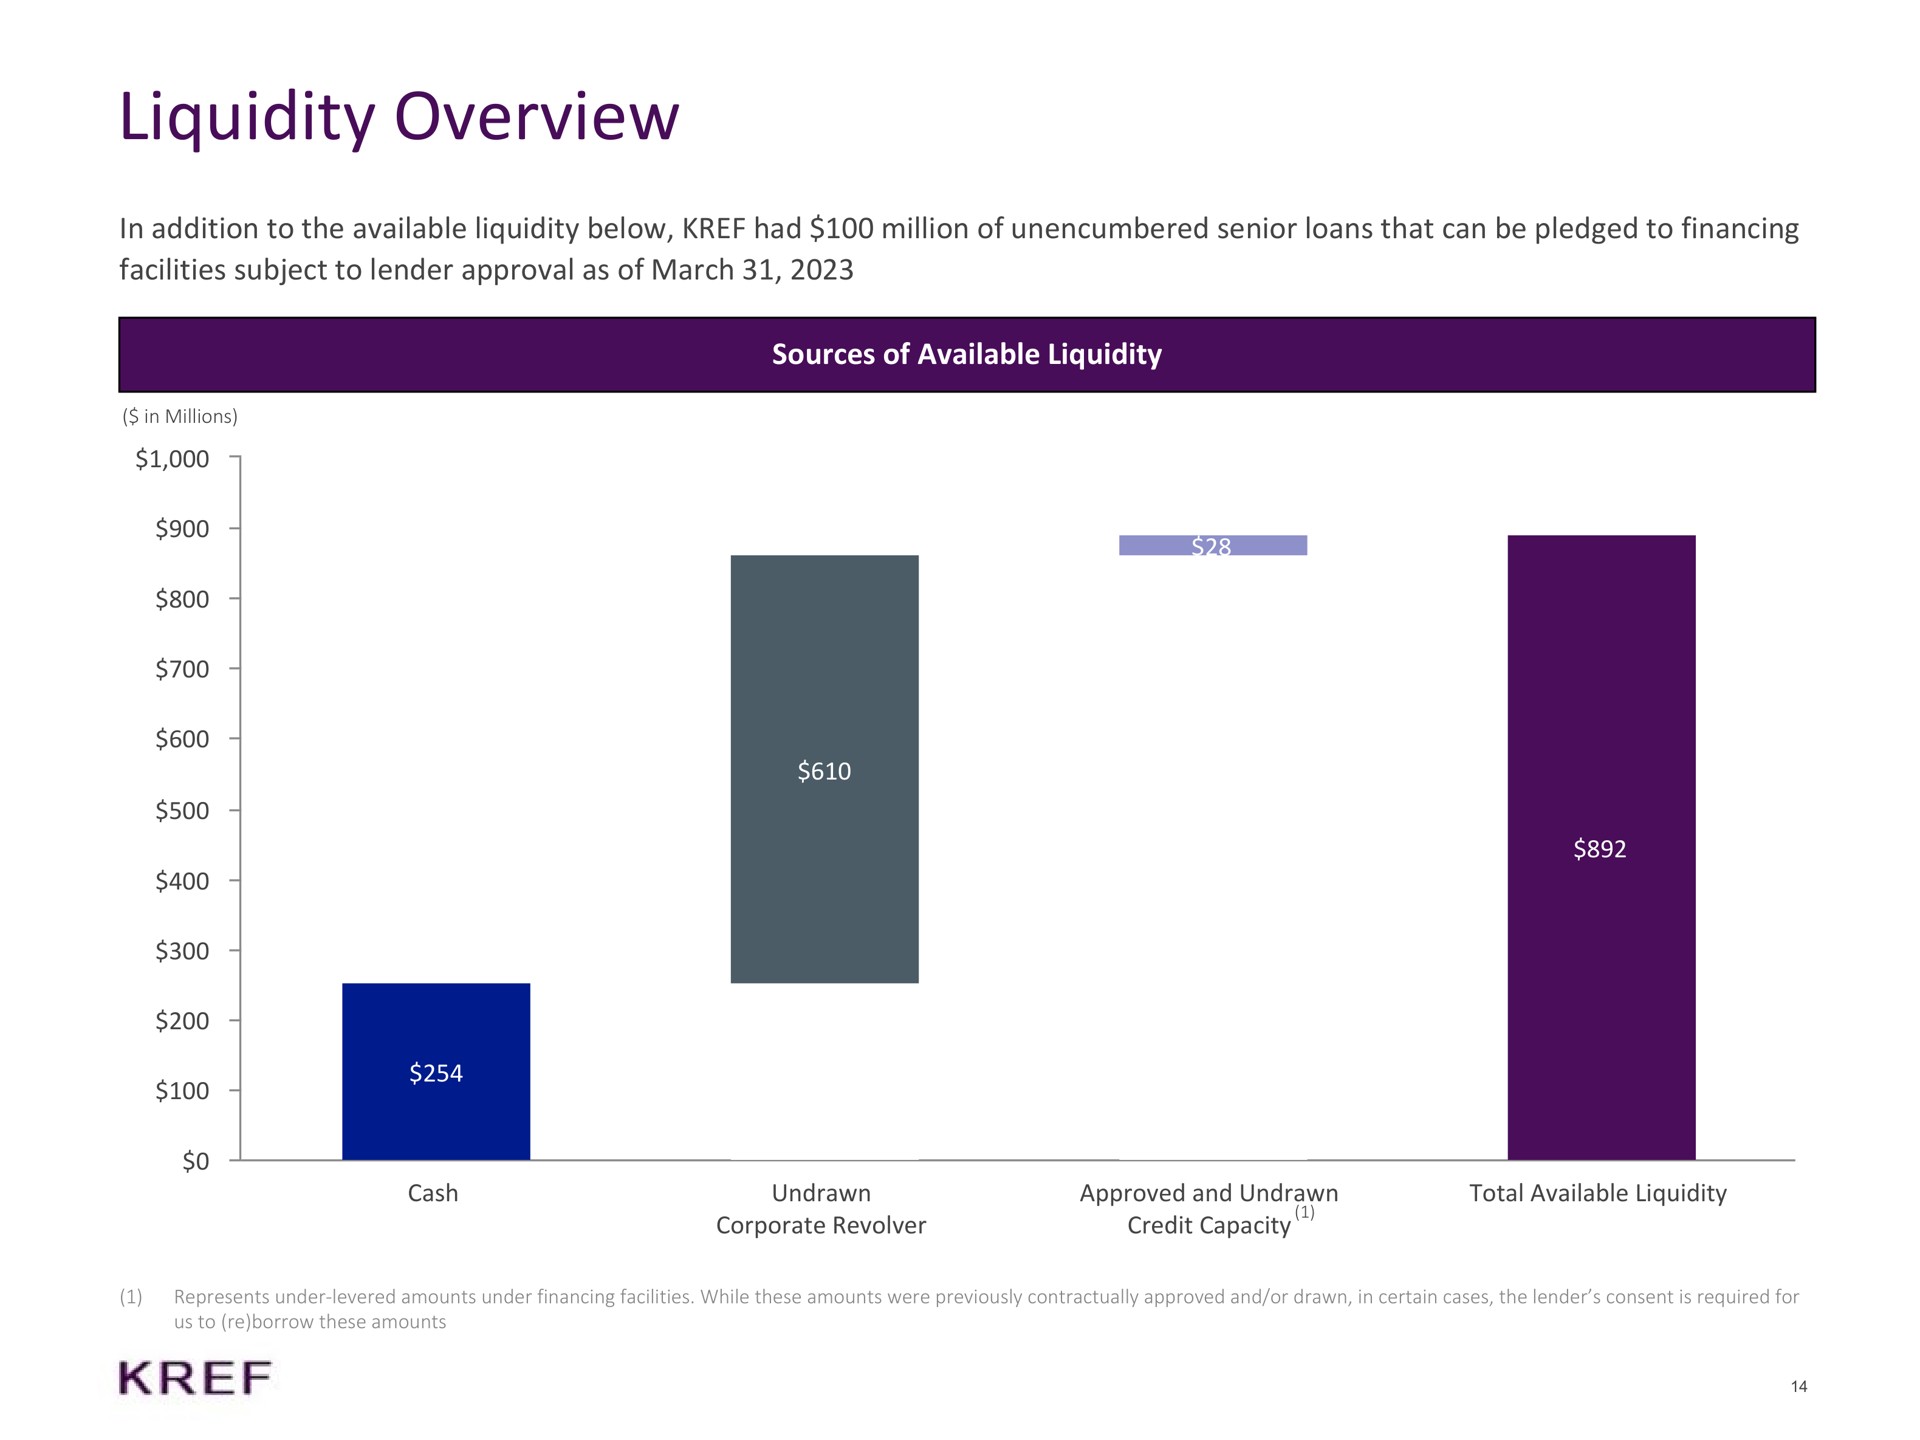 liquidity overview in addition to the available liquidity below had million of unencumbered senior loans that can be pledged to financing facilities subject to lender approval as of march sources of available liquidity | KKR Real Estate Finance Trust